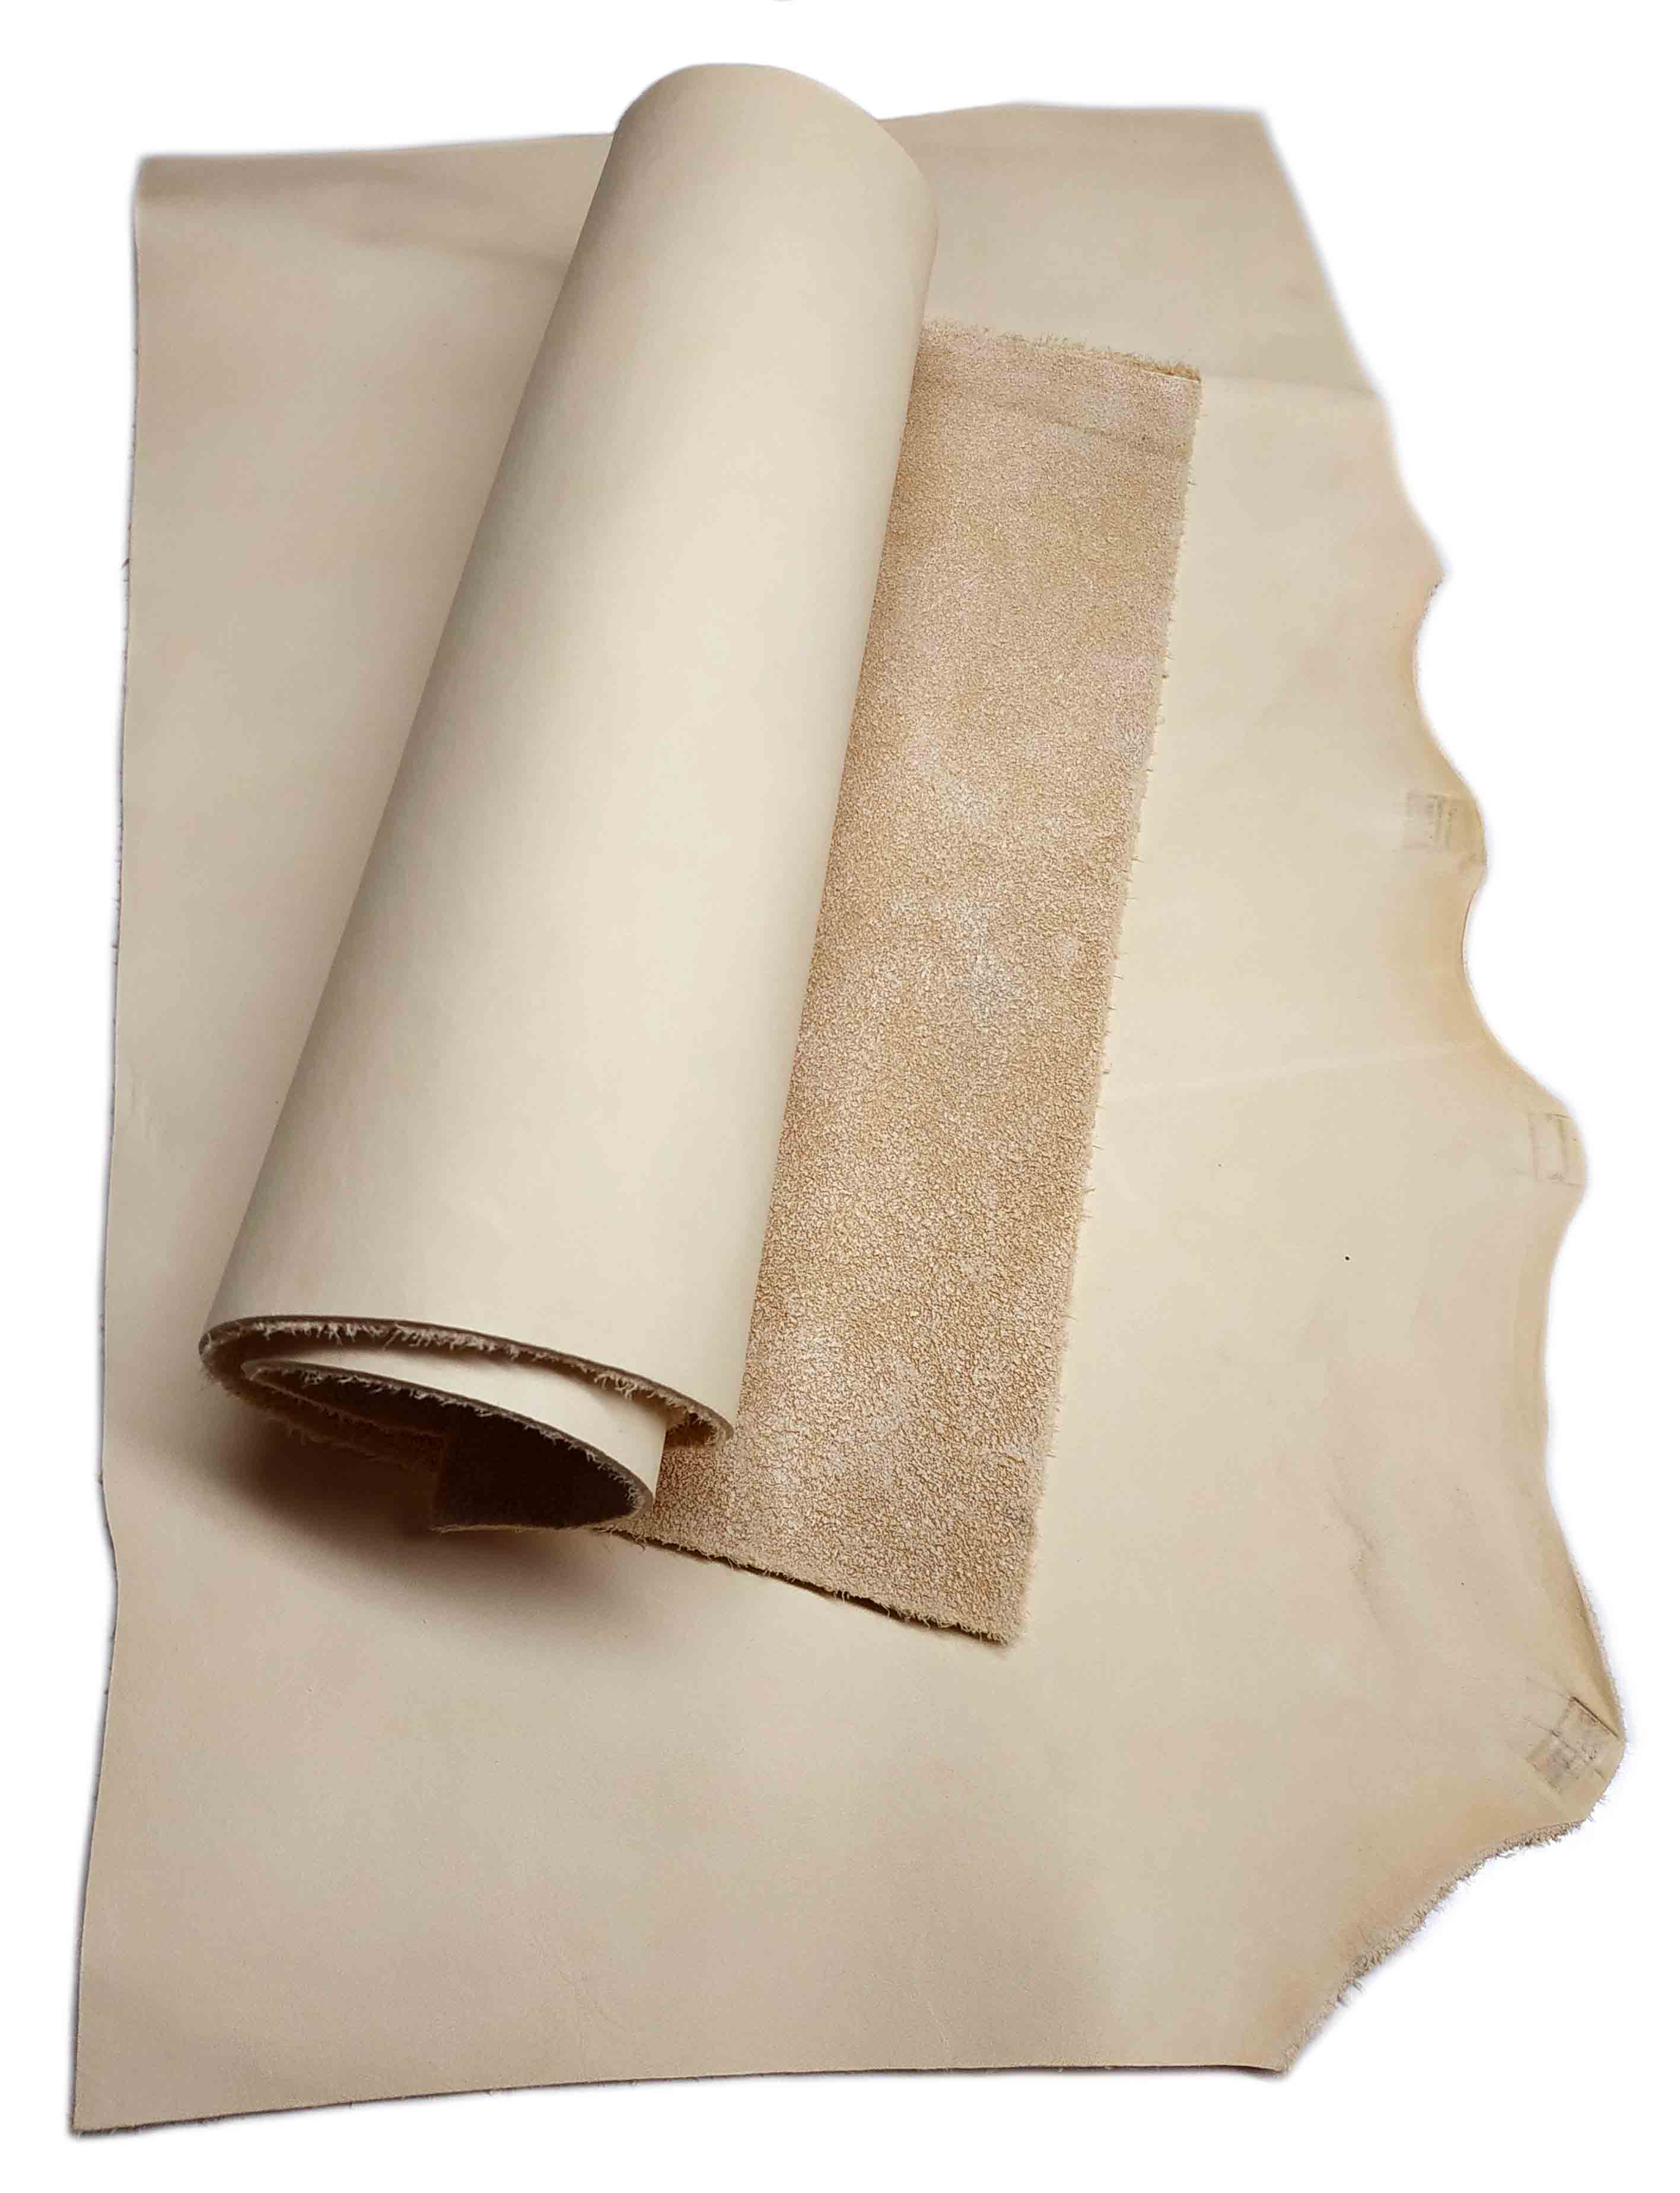 Cow Hide Leather Sheets Lightweight 3-4 oz Mixed with 4-5 oz and Veg-Tan Tooling Leather Remnan 1 lb Vegetable Tanned Scrap Leather Pieces for Crafting One Pound Veg Tan Leather Scrap 